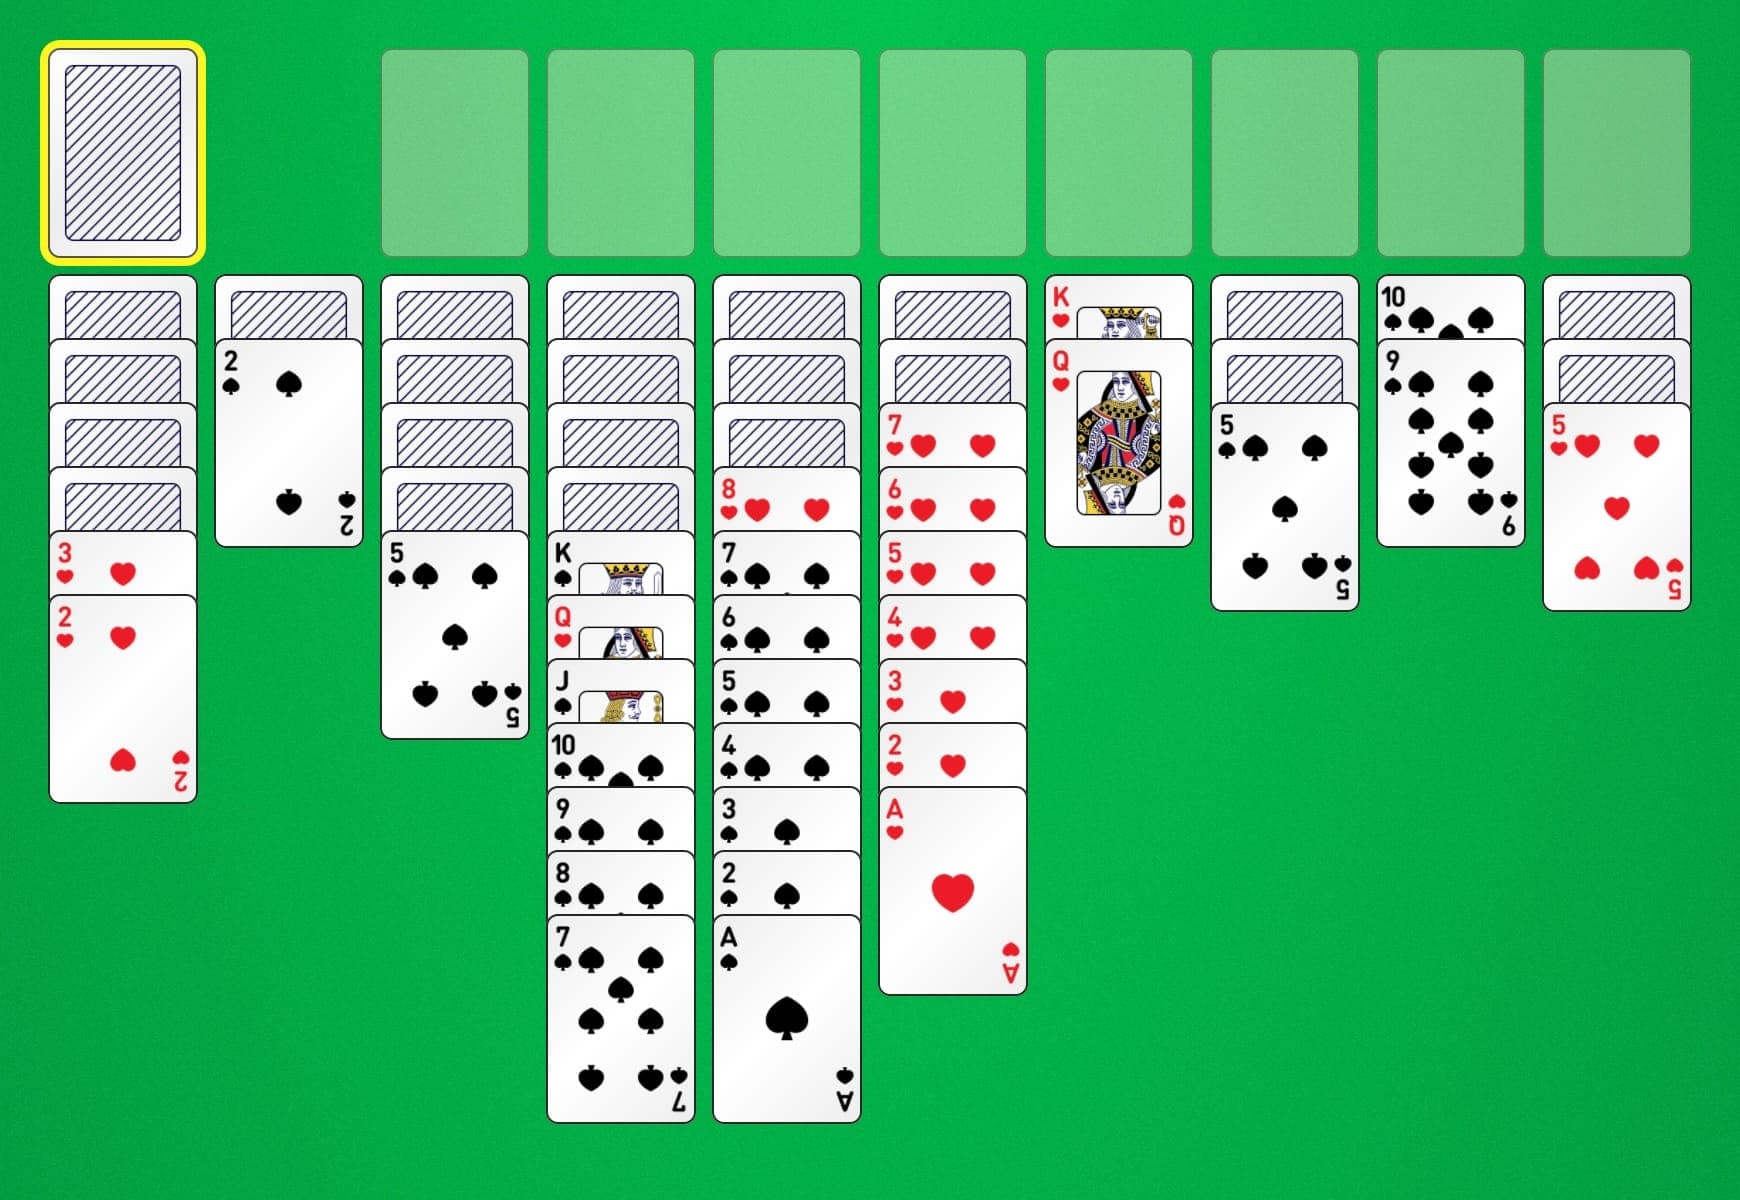 Spider solitaire free games no download grand theft auto san andreas hack apk free download